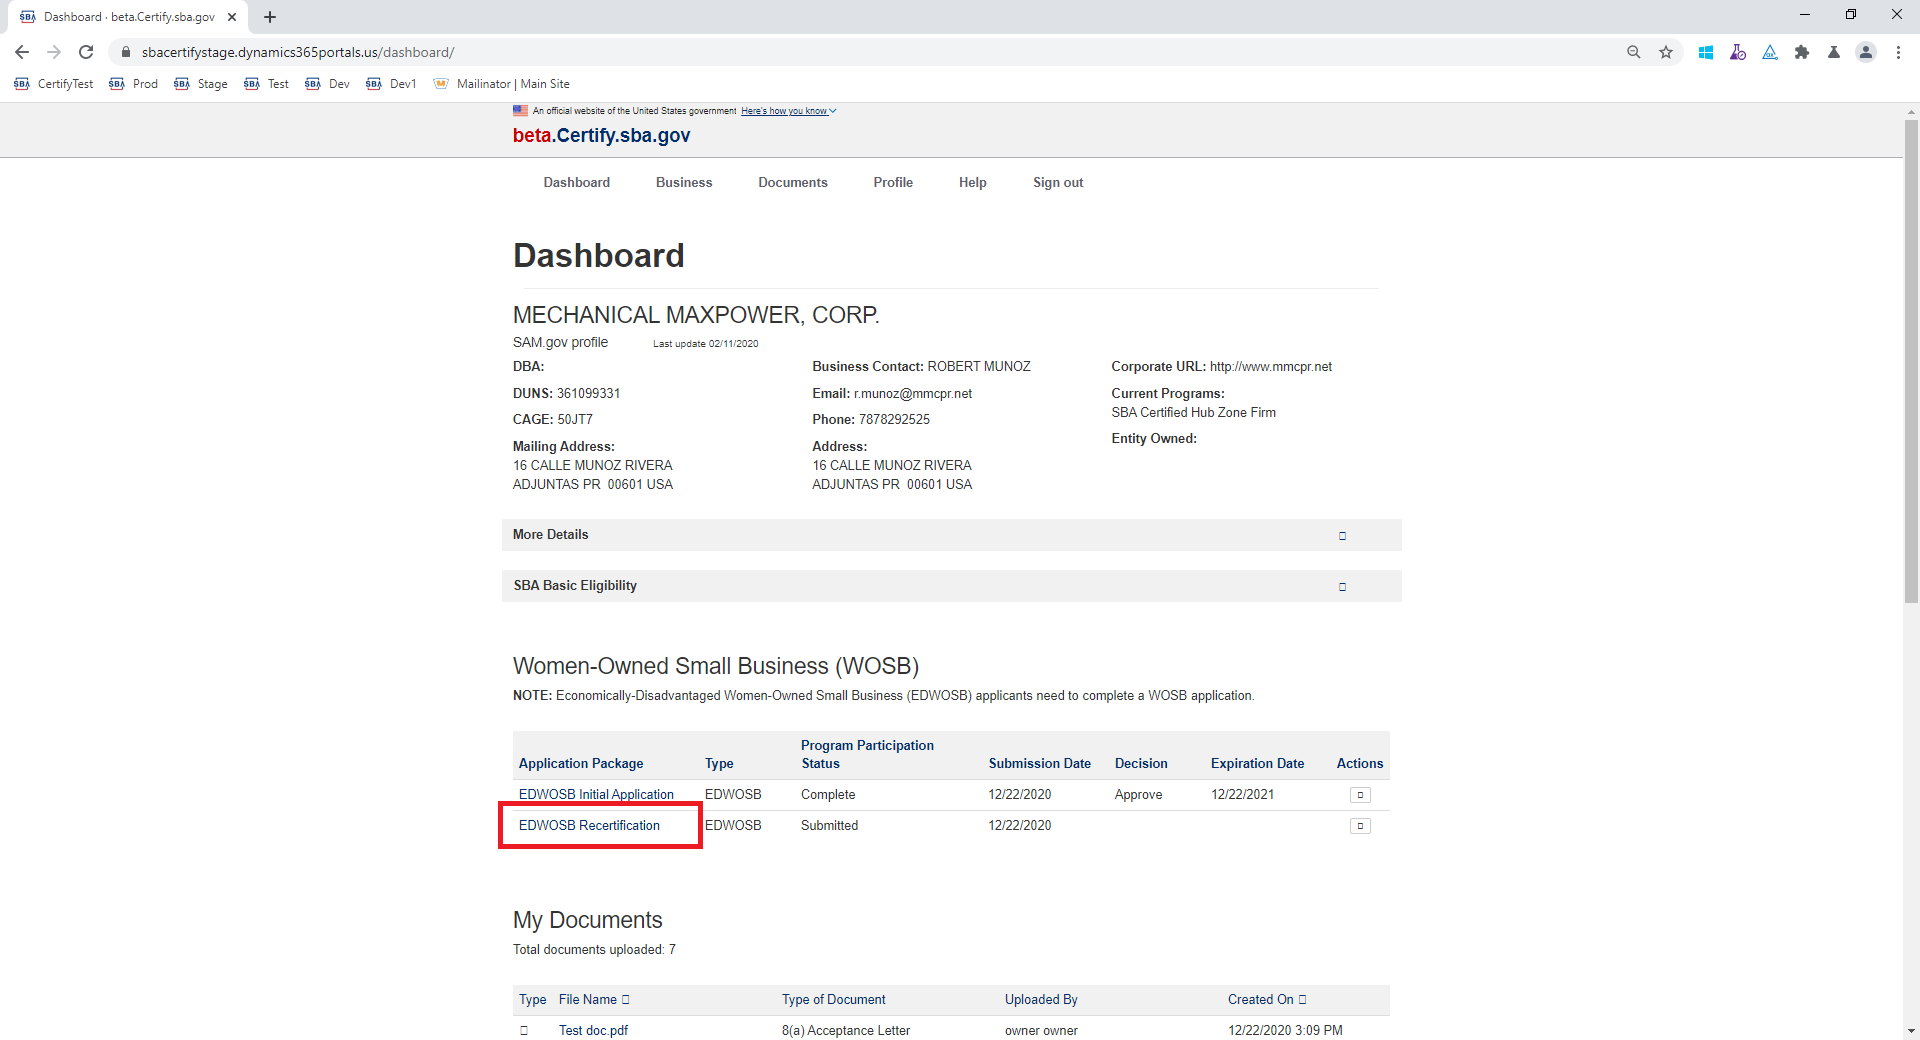 A screenshot showing a sample applicant's firm in beta.Certify.sba.gov and listing the link to begin a firm's recertification application.